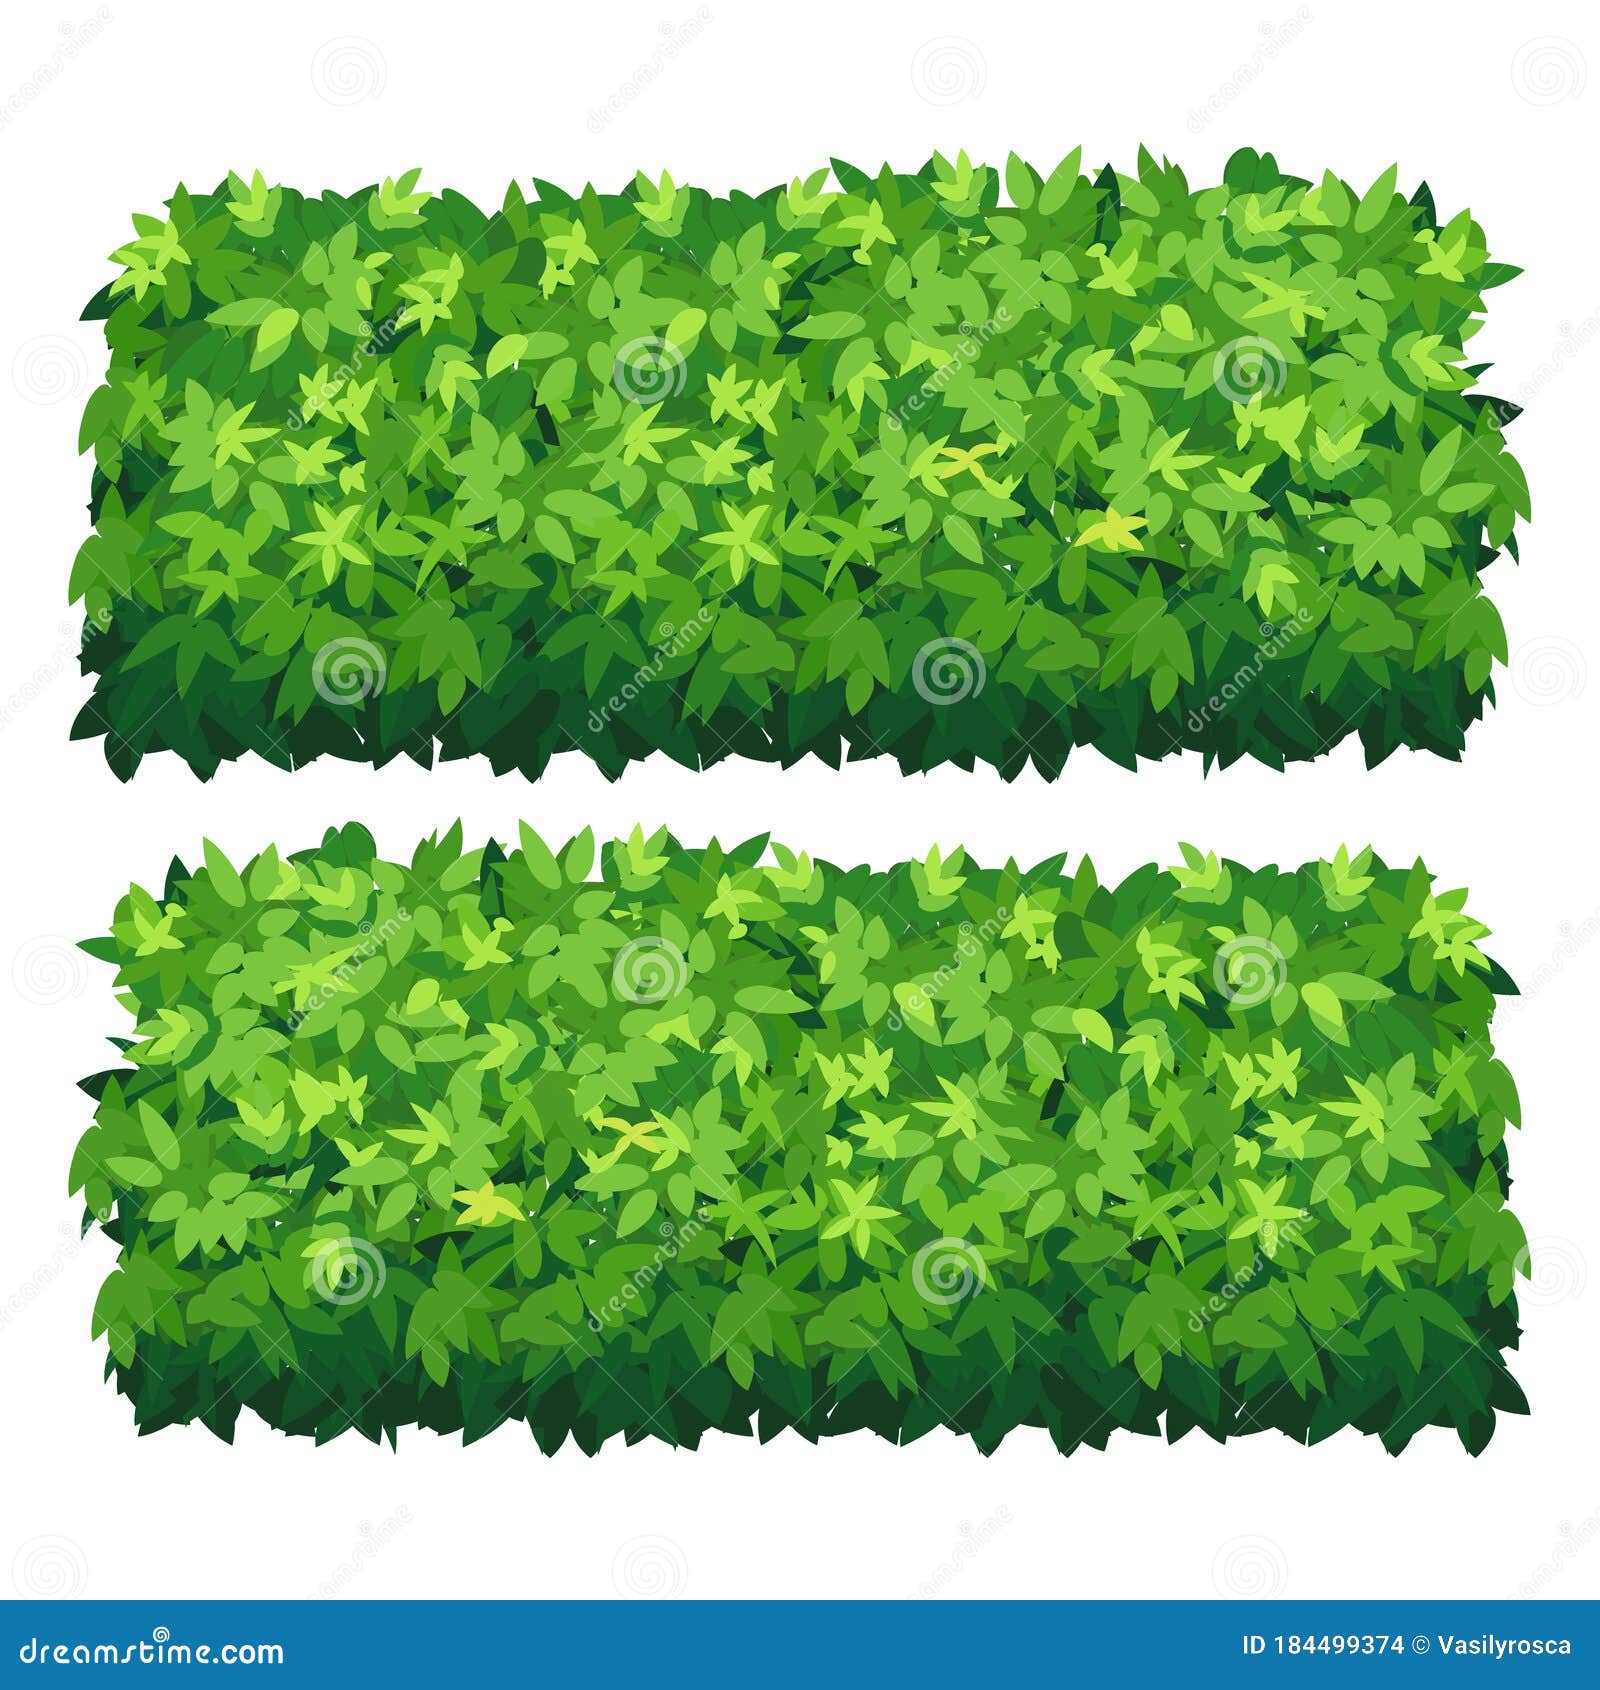 Shrubbery Cartoons, Illustrations & Vector Stock Images - 1516 Pictures